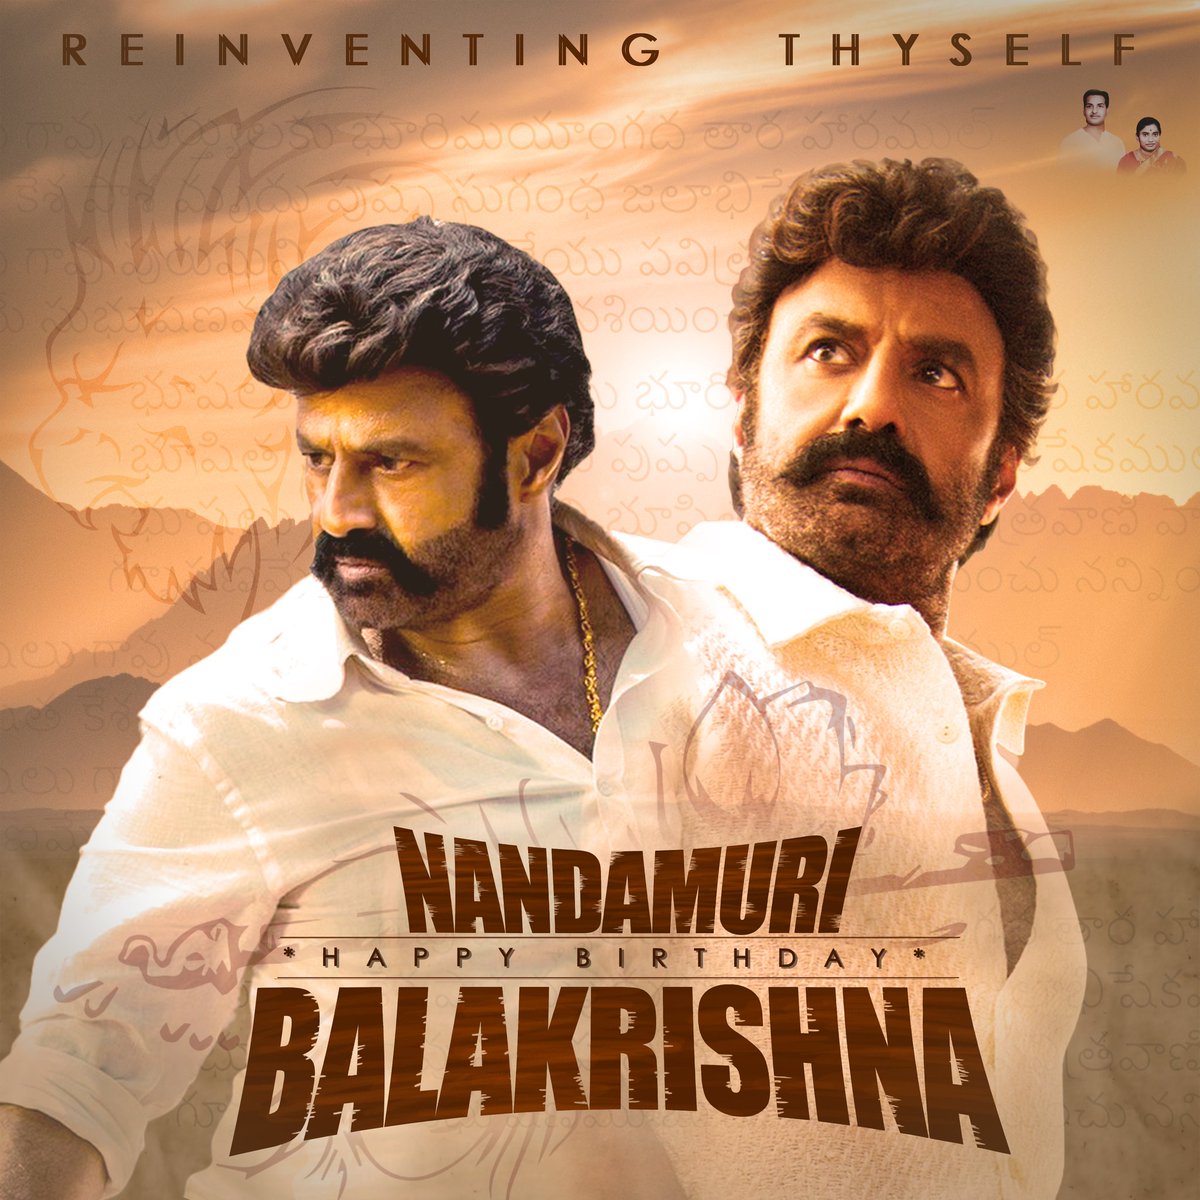 Happy to release a CDP of Shri Nandamuri Balakrishna Garu on occassion of his 62nd Birthday.
He is taking forward his father's legacy, in the film industry & the political arena.
NBK is not just a person, but also an emotion.
An inspiration to many! 🙏
#NBKBirthdayCDP